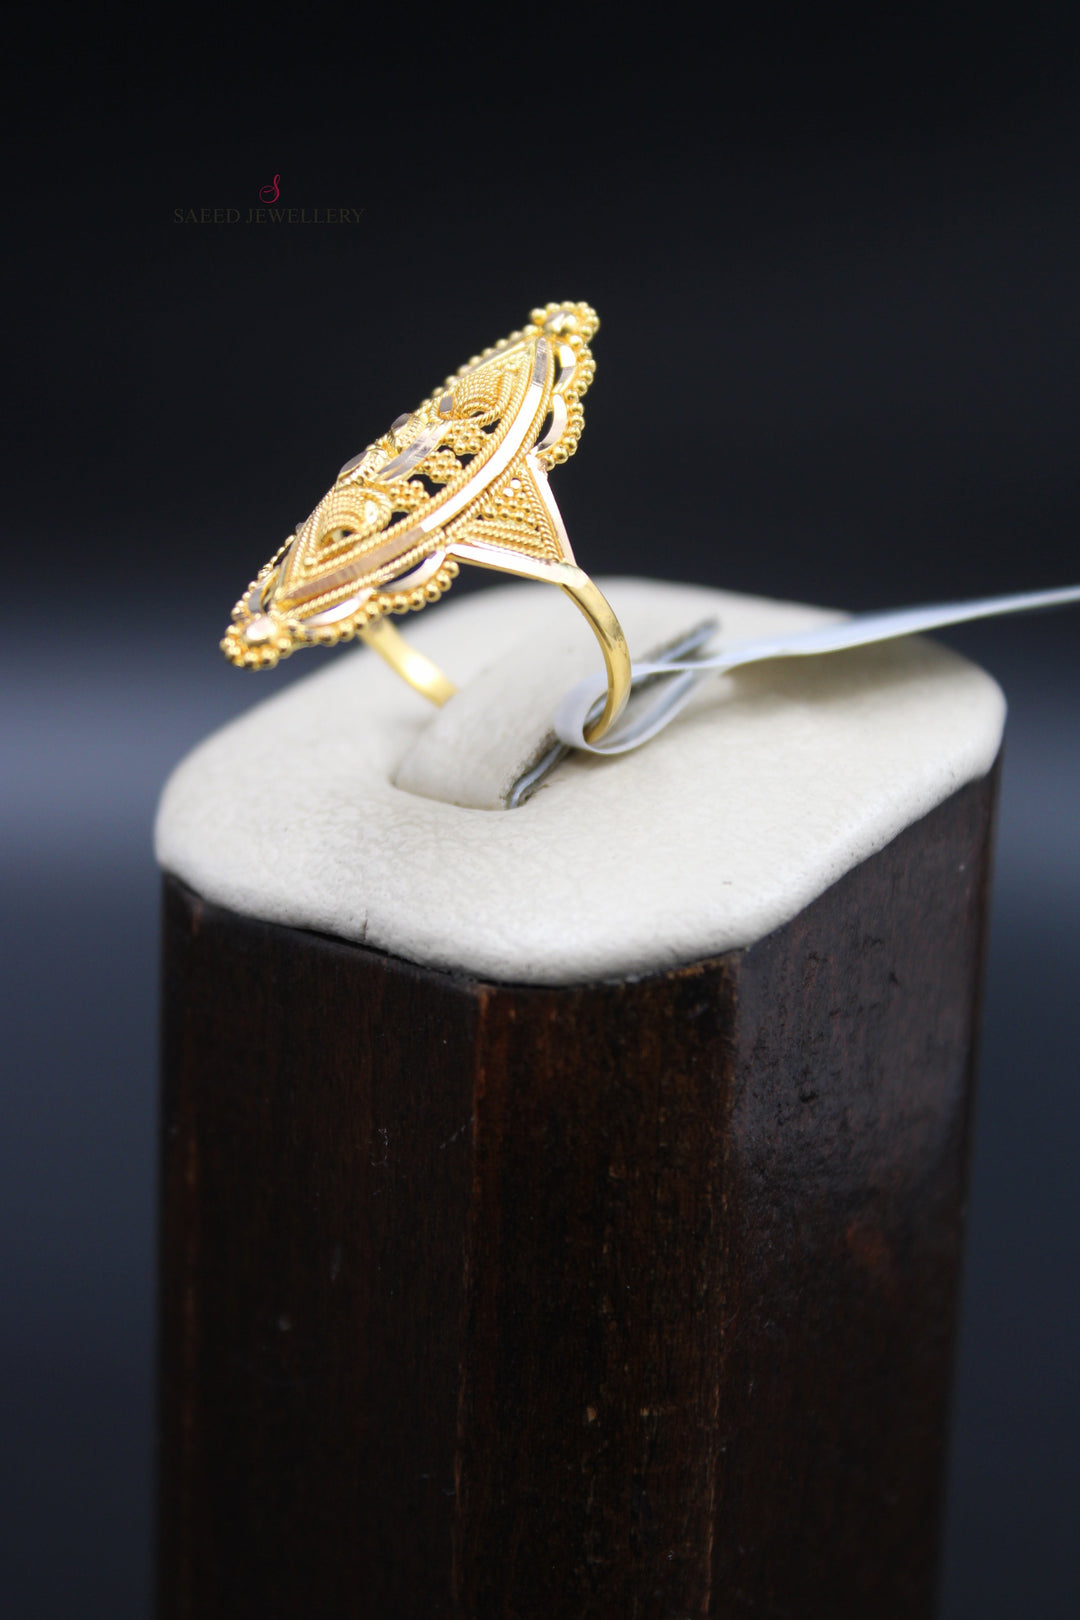 21K Gold Indian Ring by Saeed Jewelry - Image 7